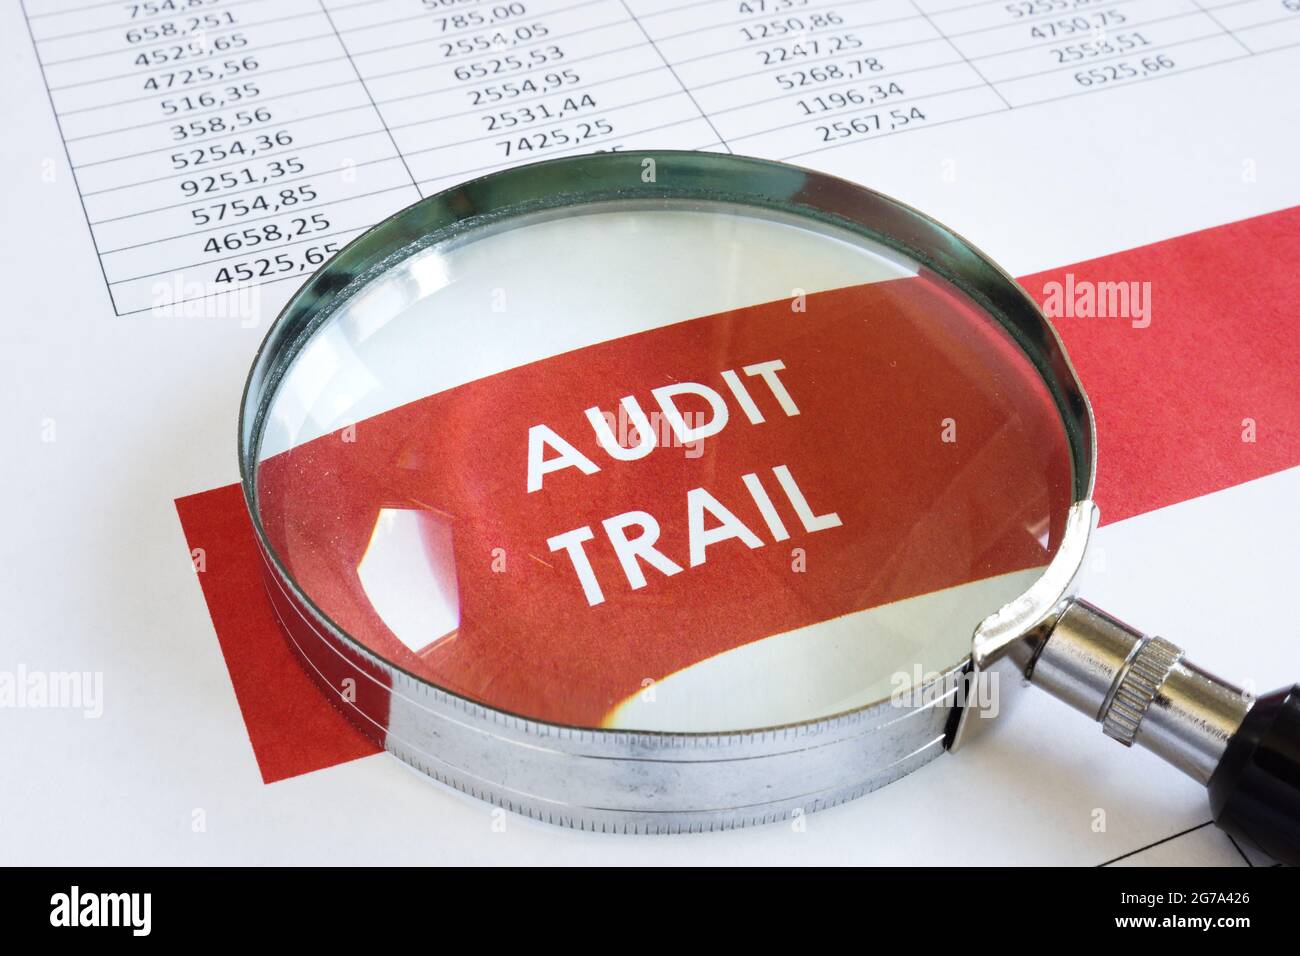 Audit trail report and magnifying glass on the page. Stock Photo